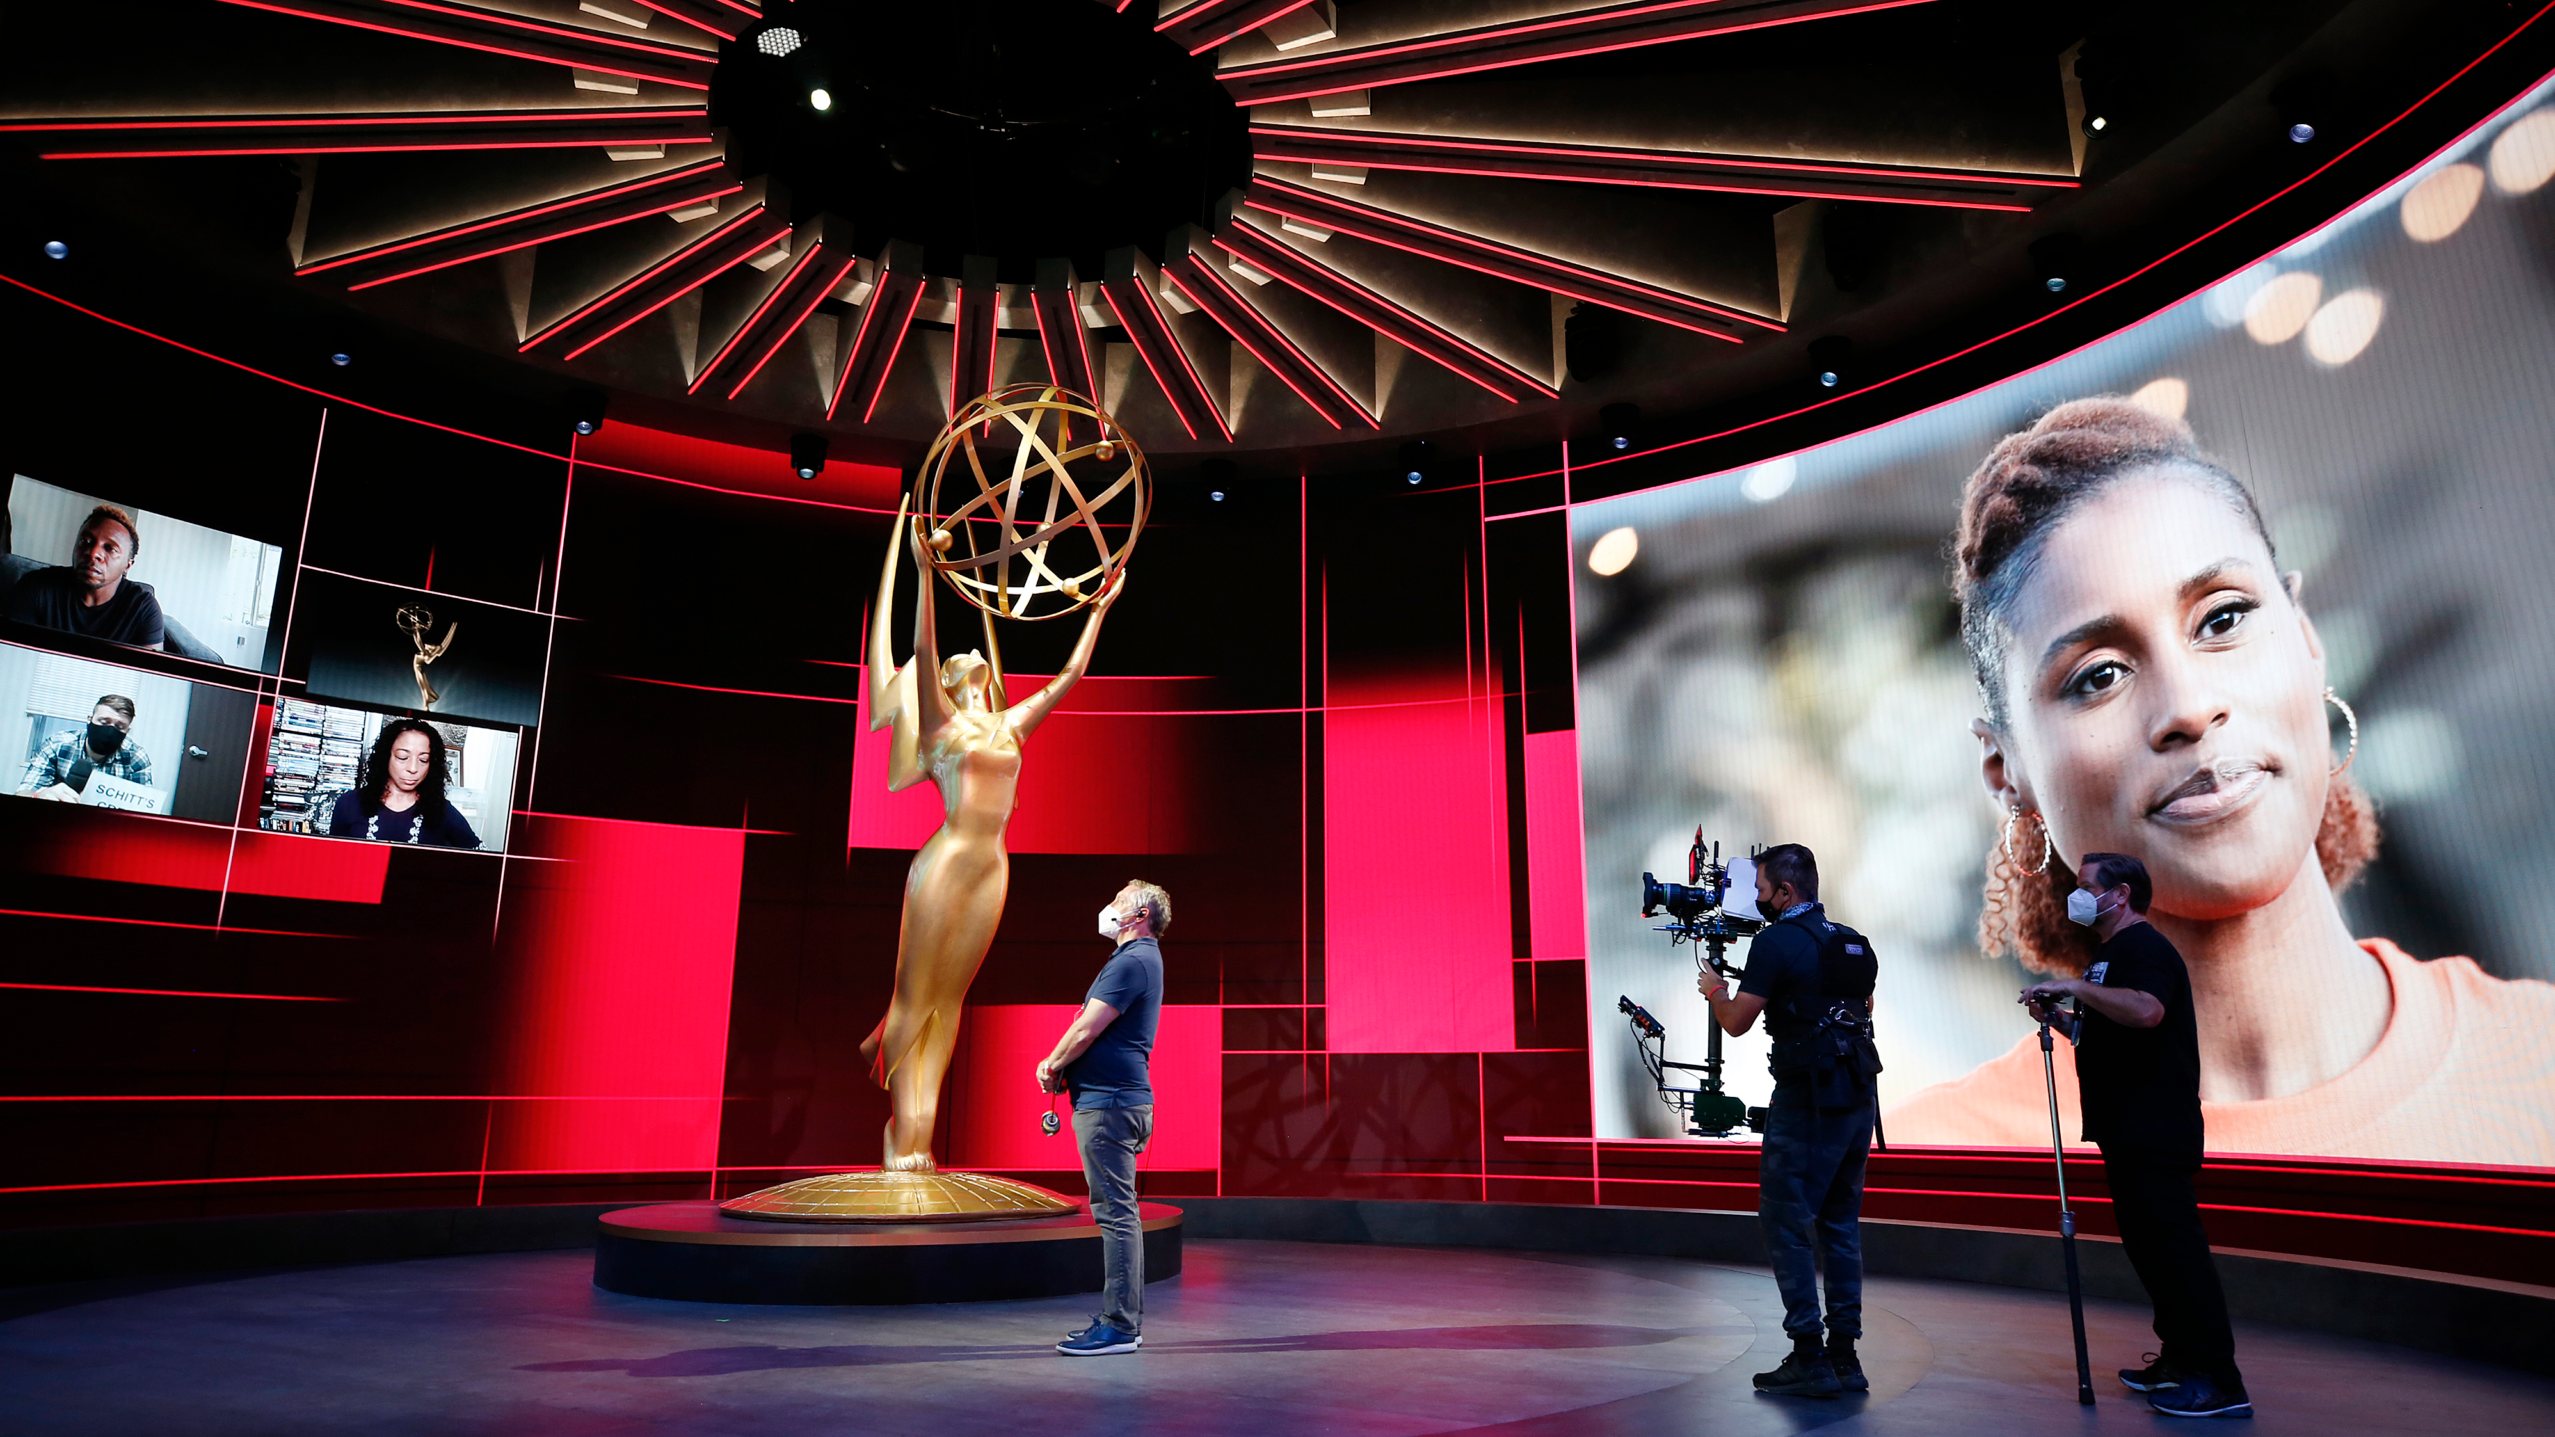 Emmy Host Jimmy Kimmel laughs with stage Manager Gary Natoli during rehearsals Friday for the 72nd Annual Emmy Awards taking place at Staples Center this Sunday.